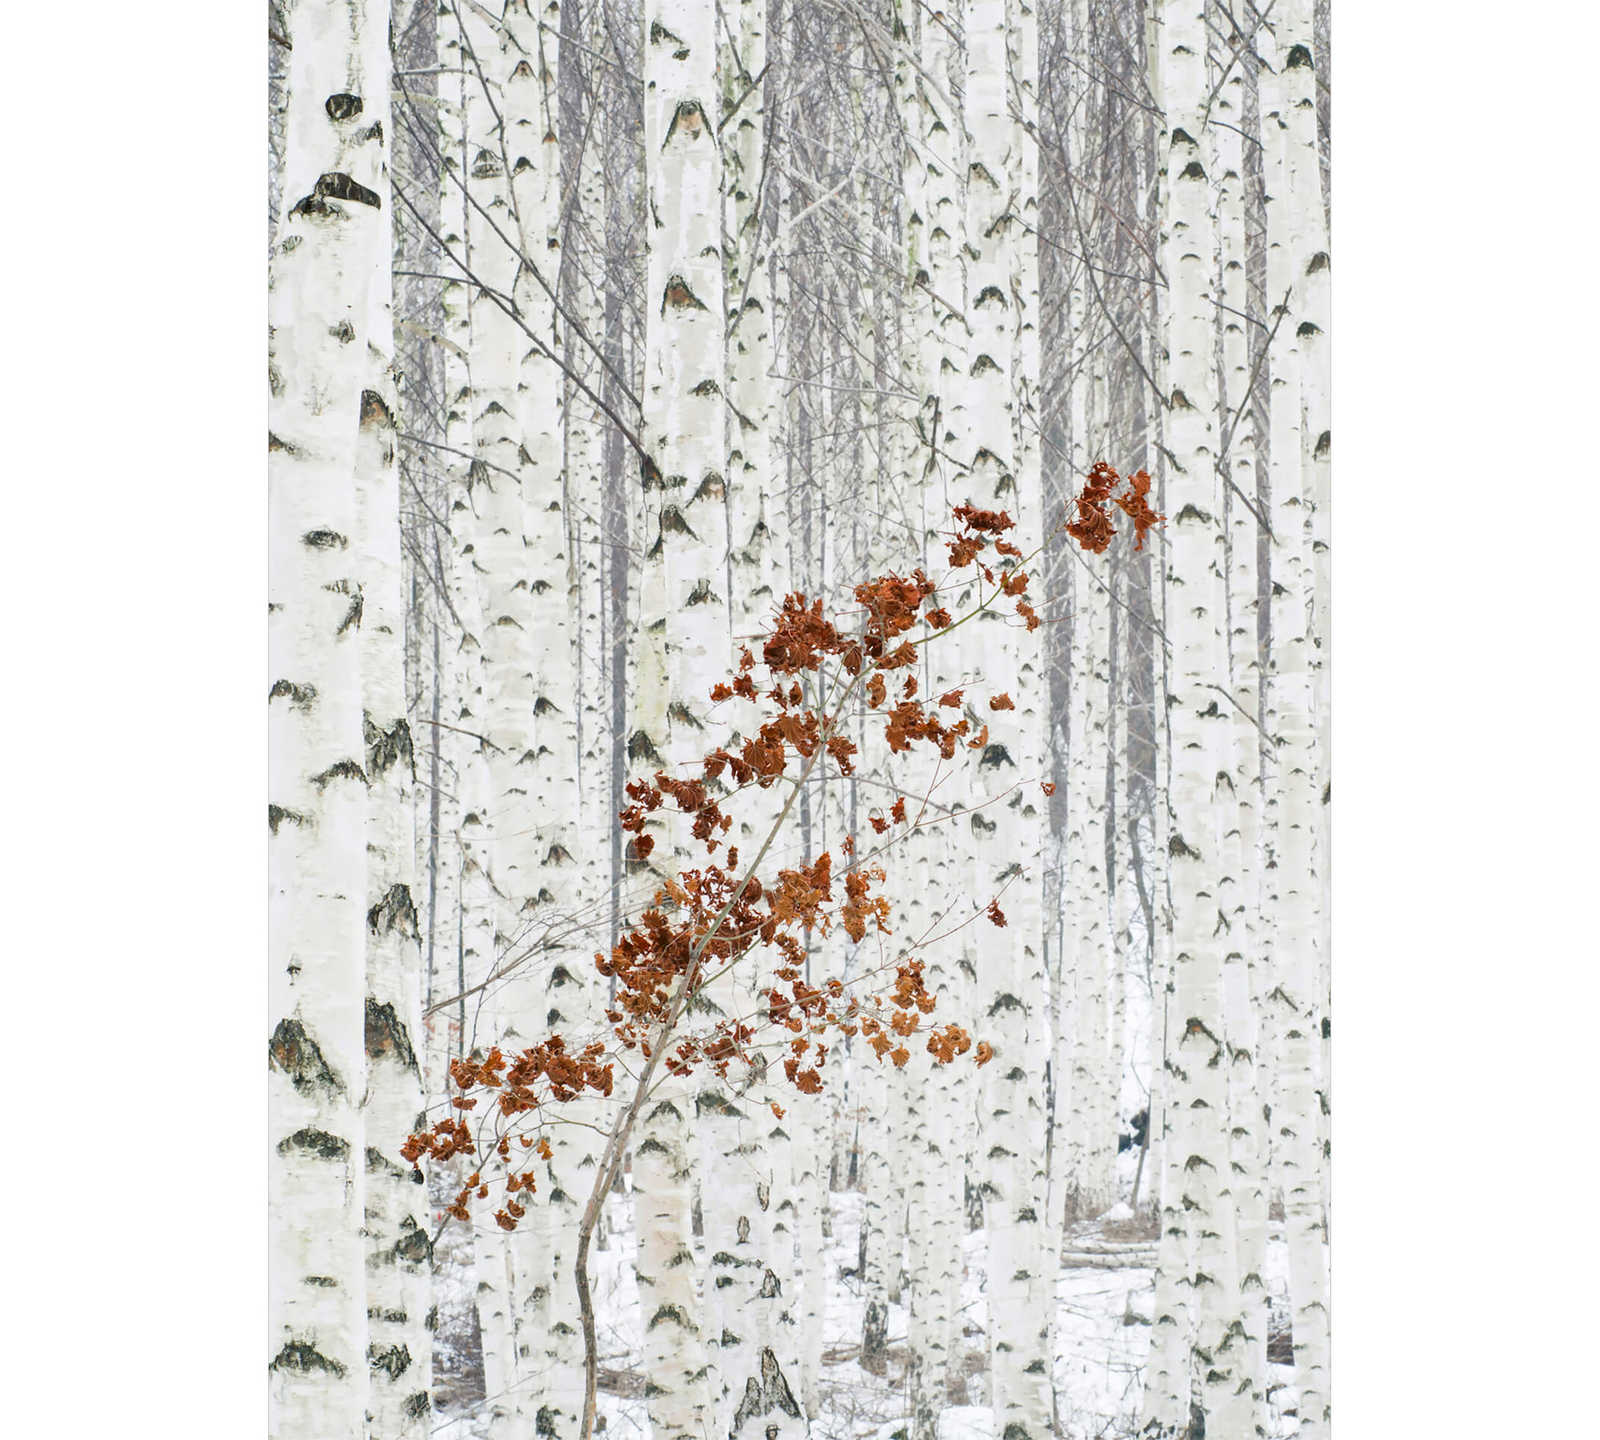         Photo wallpaper Forest of birch trees - white, grey, brown
    